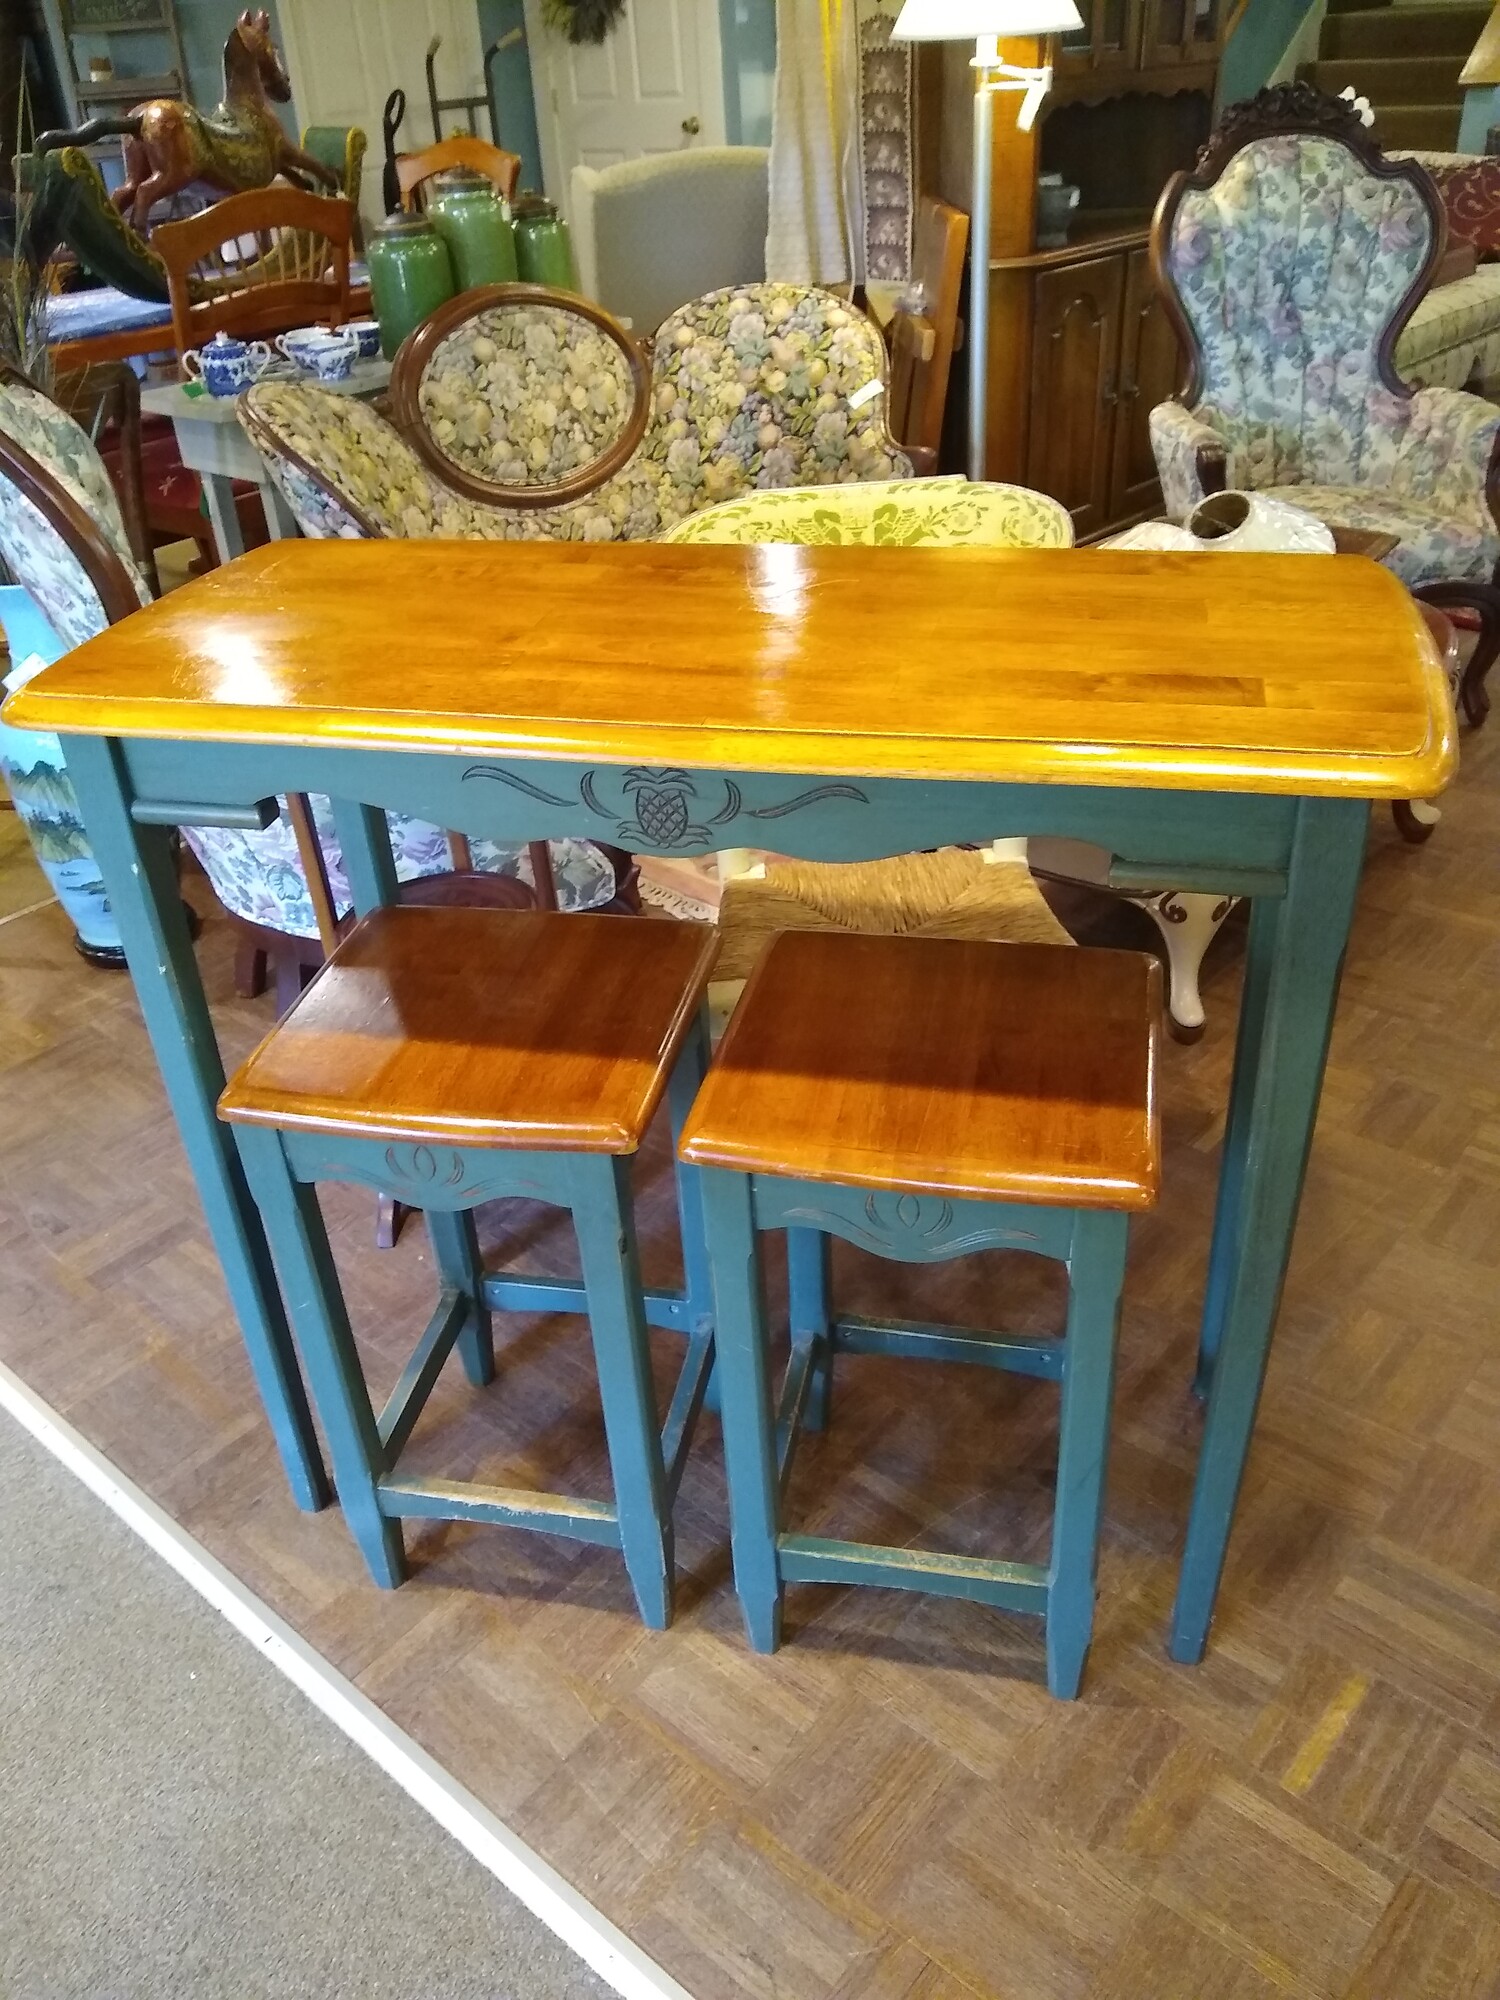 Breakfast Bar W/2 Stools

Wood breakfast bar with 2 saddle stools.  Wood top with green legs on both the bar and stools. Carved pineapple design on bar and carving on stools also.

Size: 41 in wide X 17 in deep X 36in high